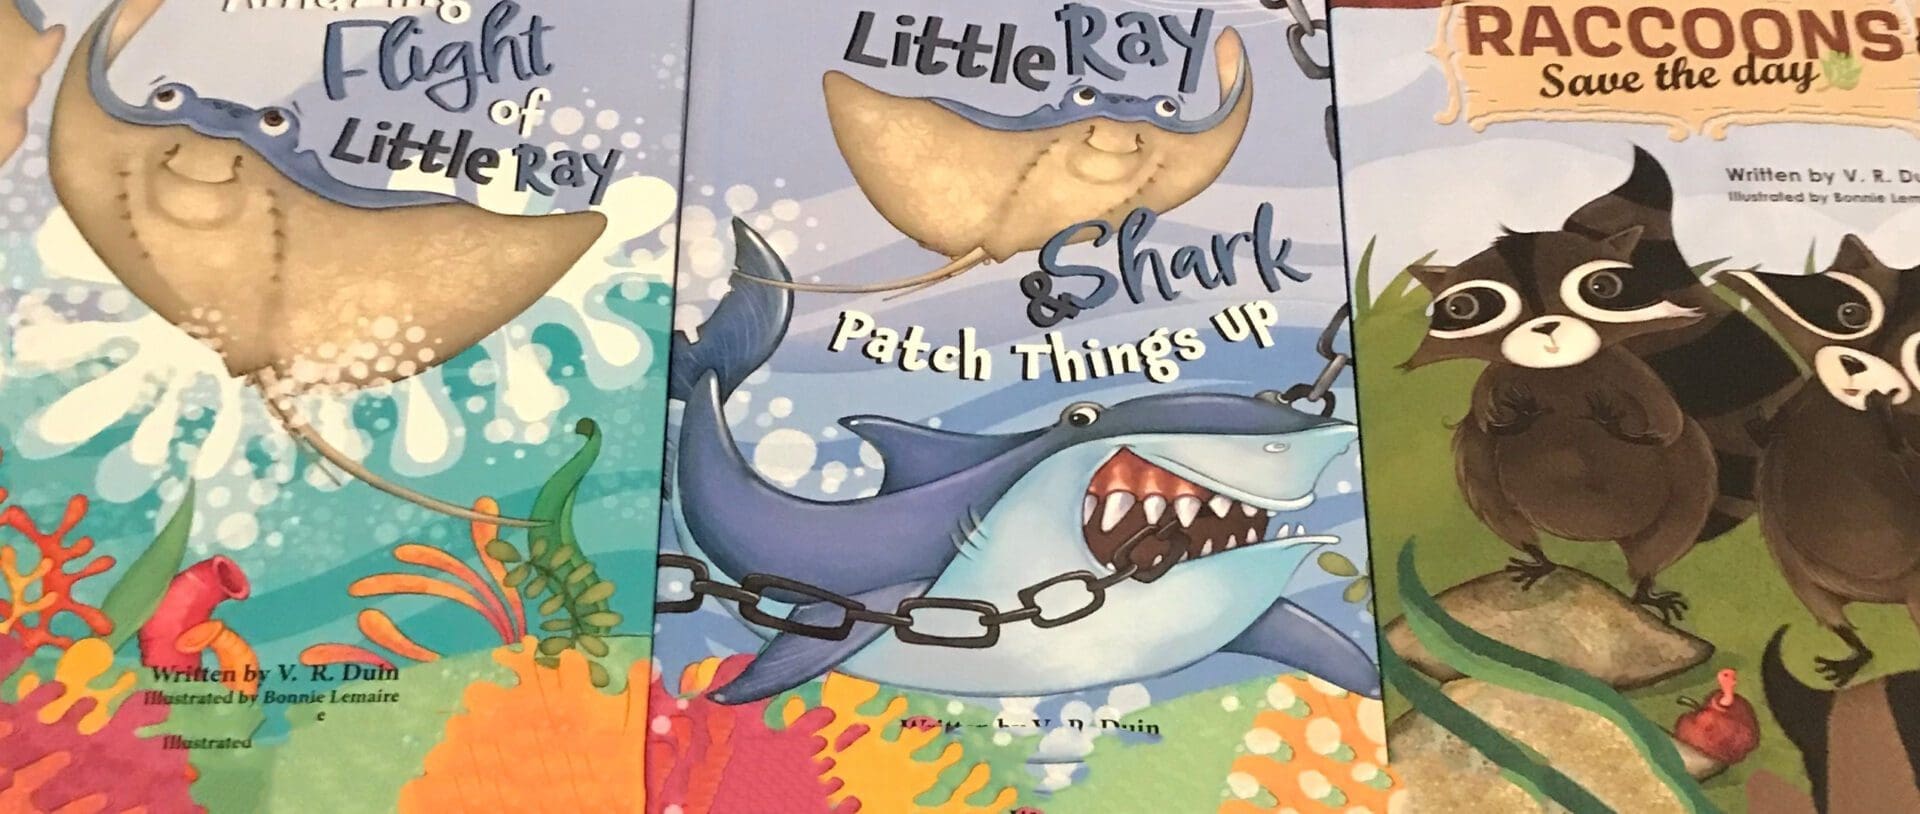 Little Ray Nature Books for Kids are shown.